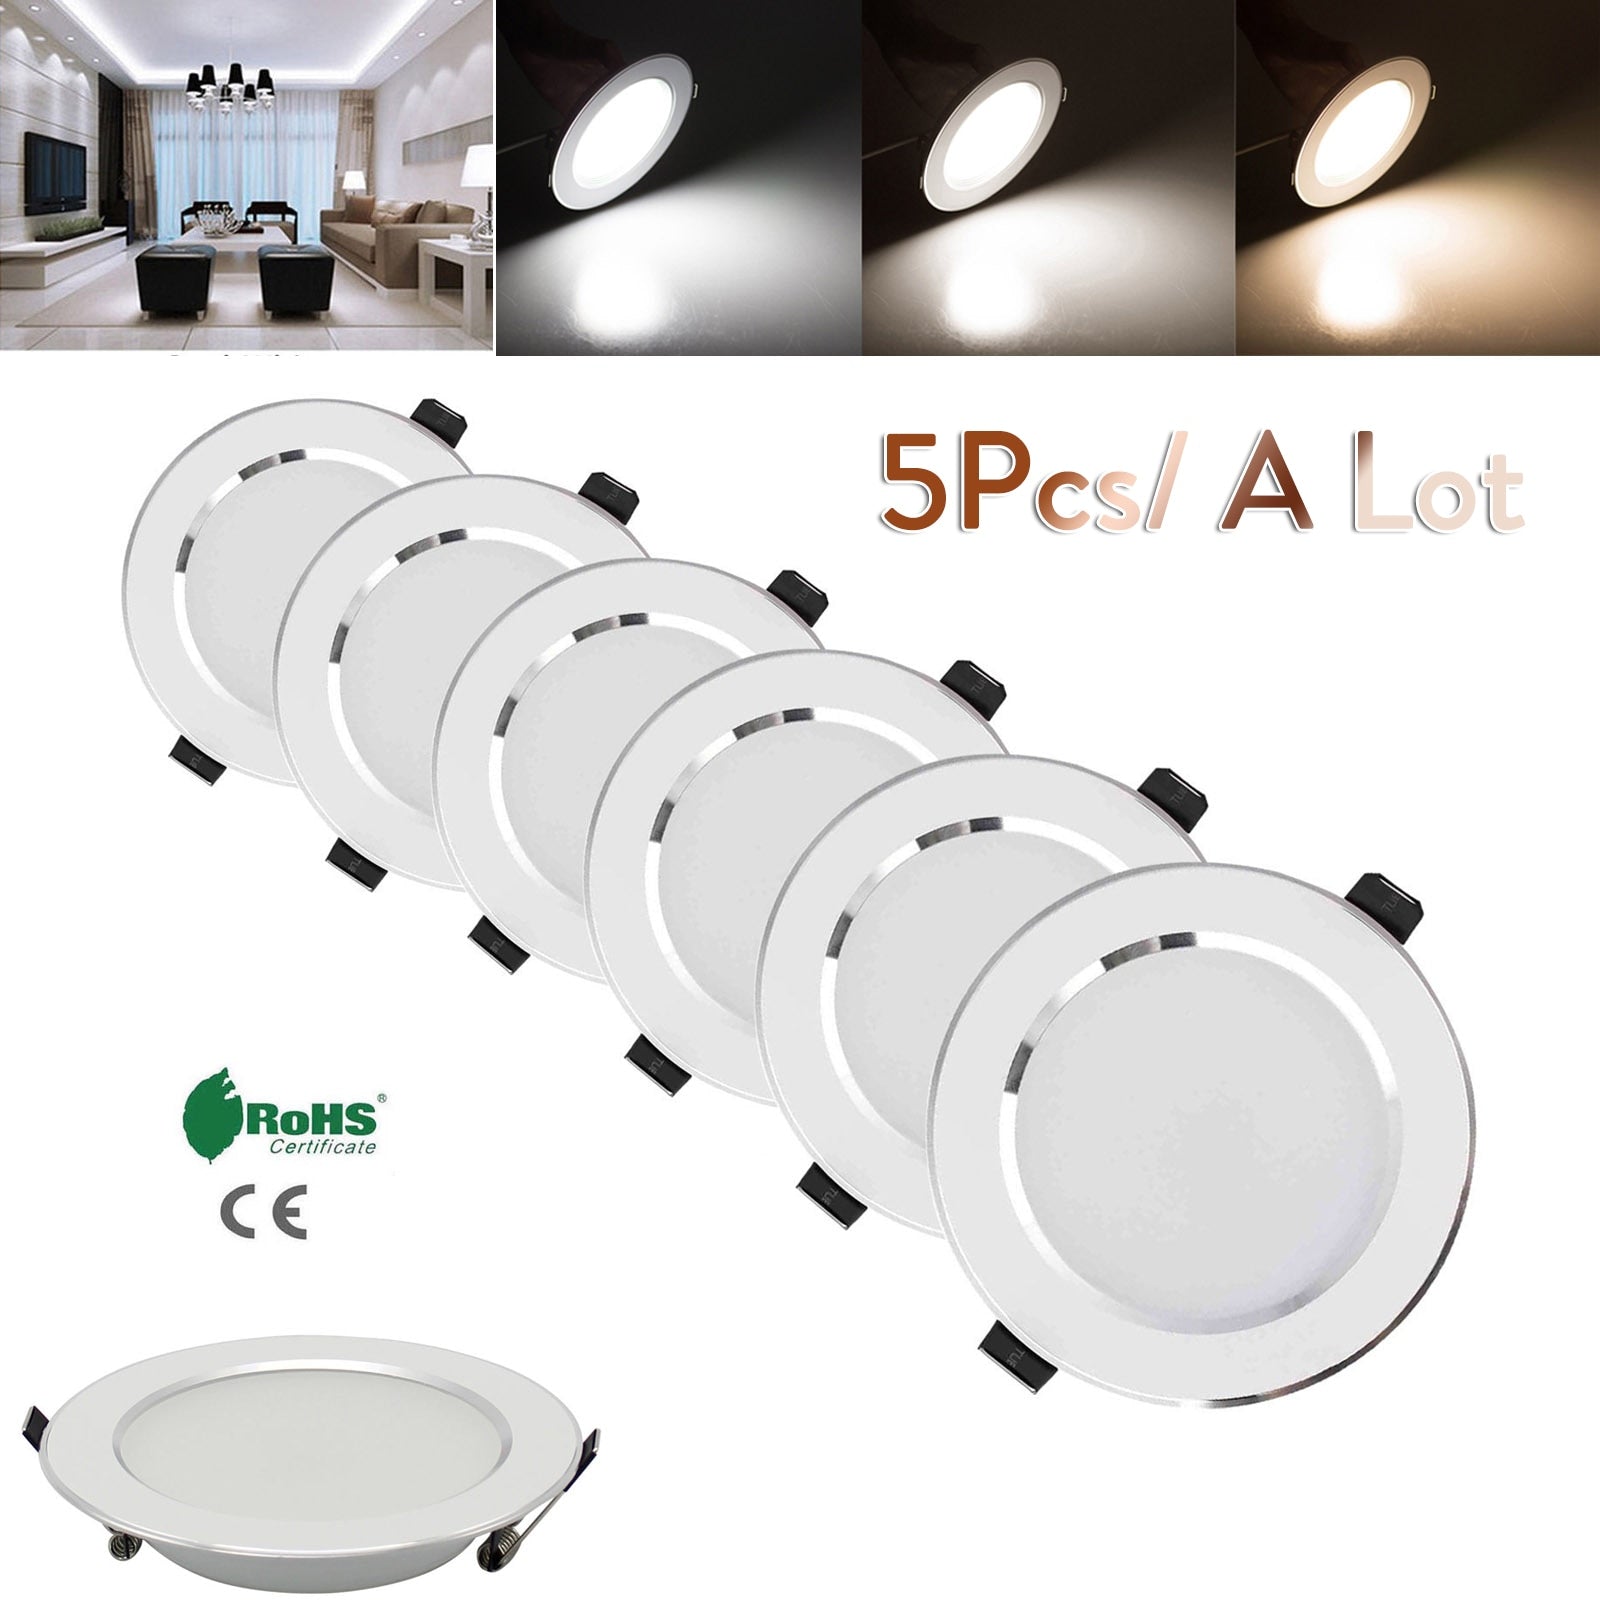 LED Recessed Ceiling Light Downlight Lamp 5PCS Dimmable 21W 18W 15W 12W 9W 7W 5W 3W 110V 220V With Driver Lighting Lamps